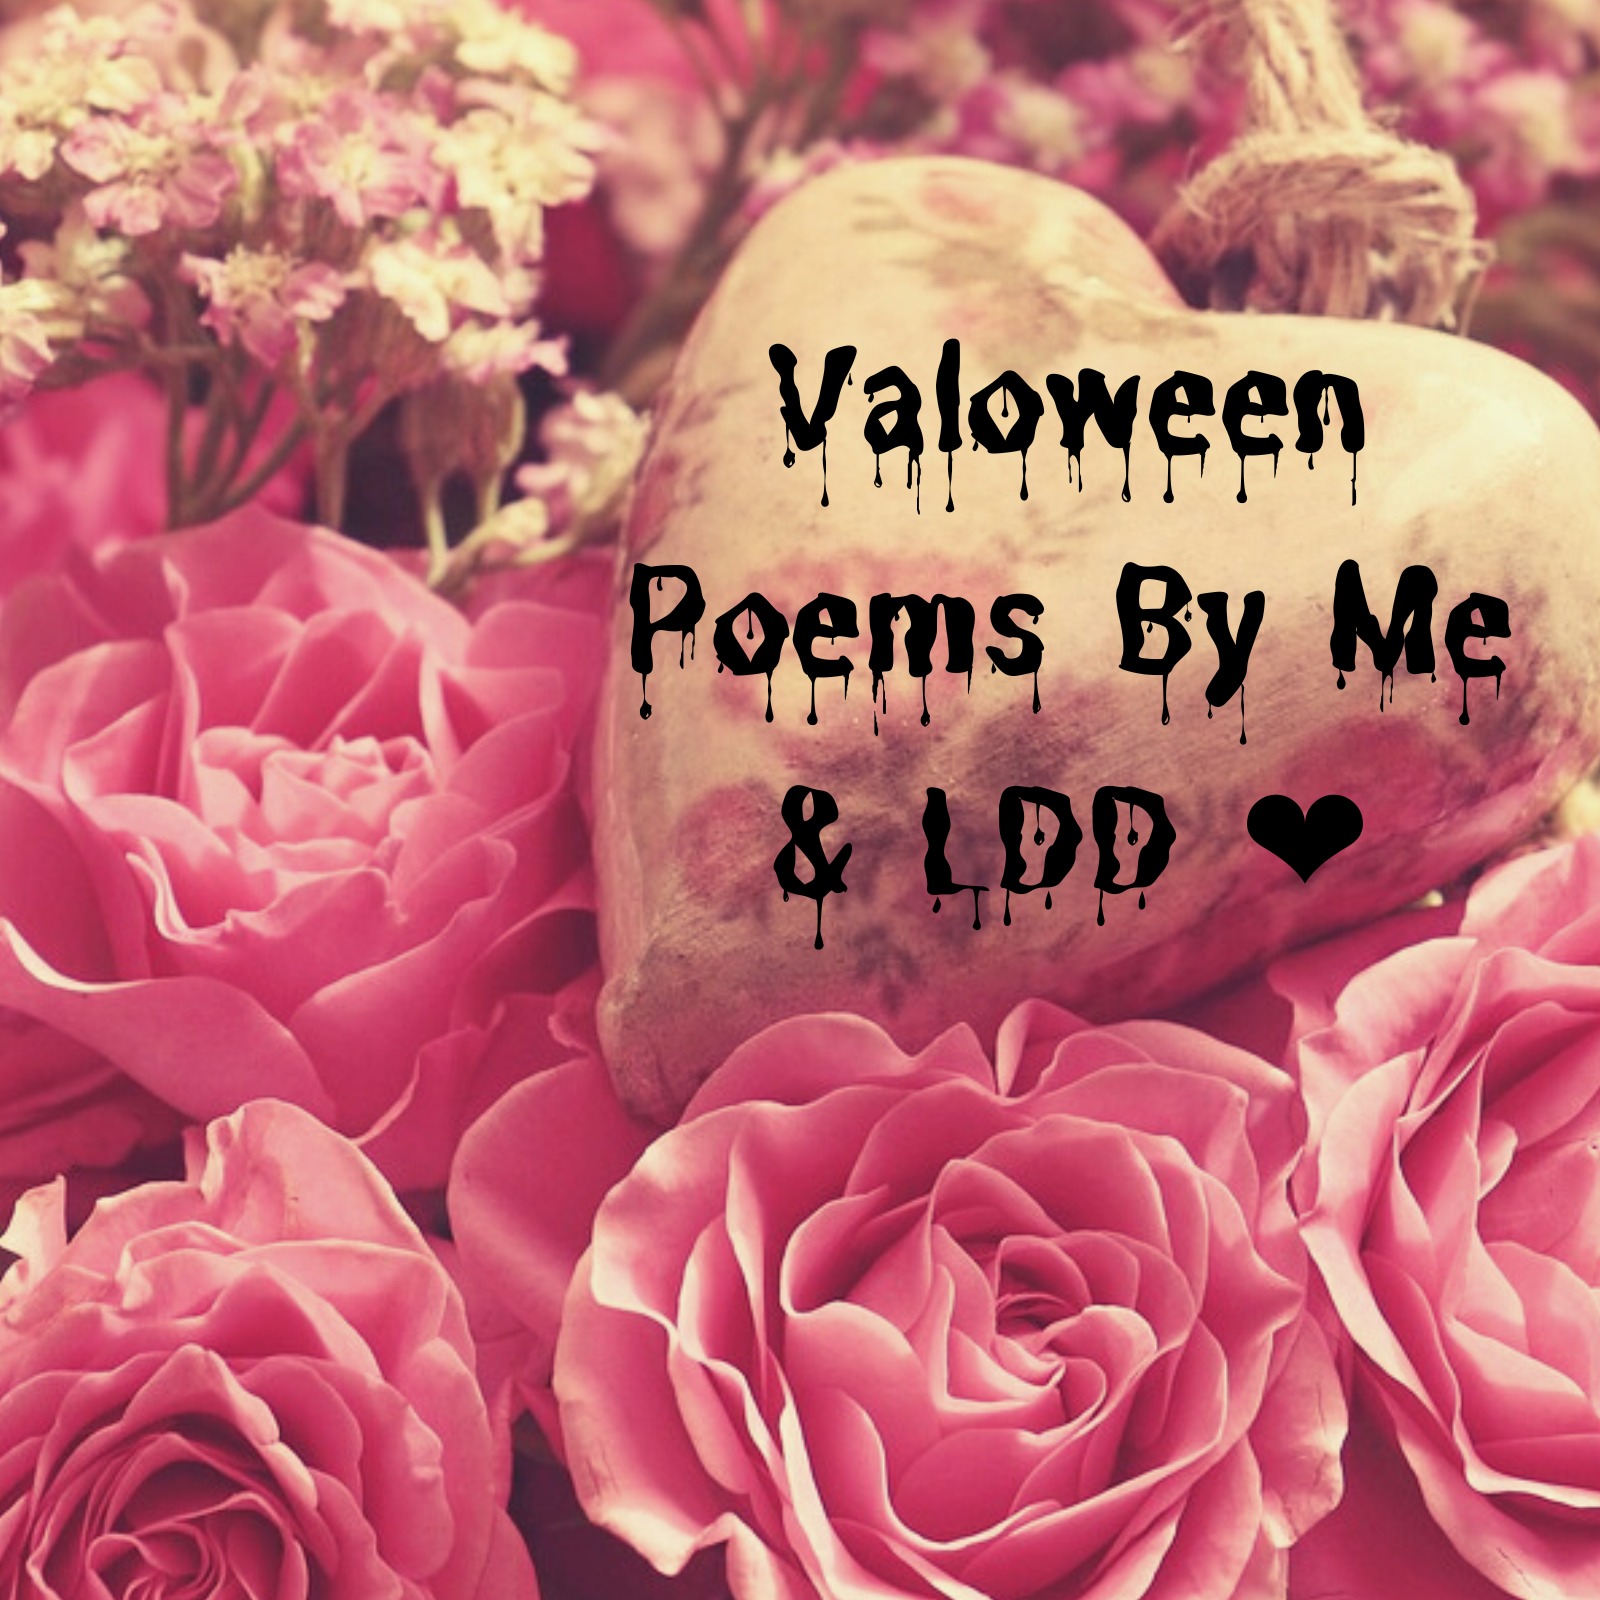 Valoween Poems By Me & LDD Poetry  * Valoween Special * Spanglish